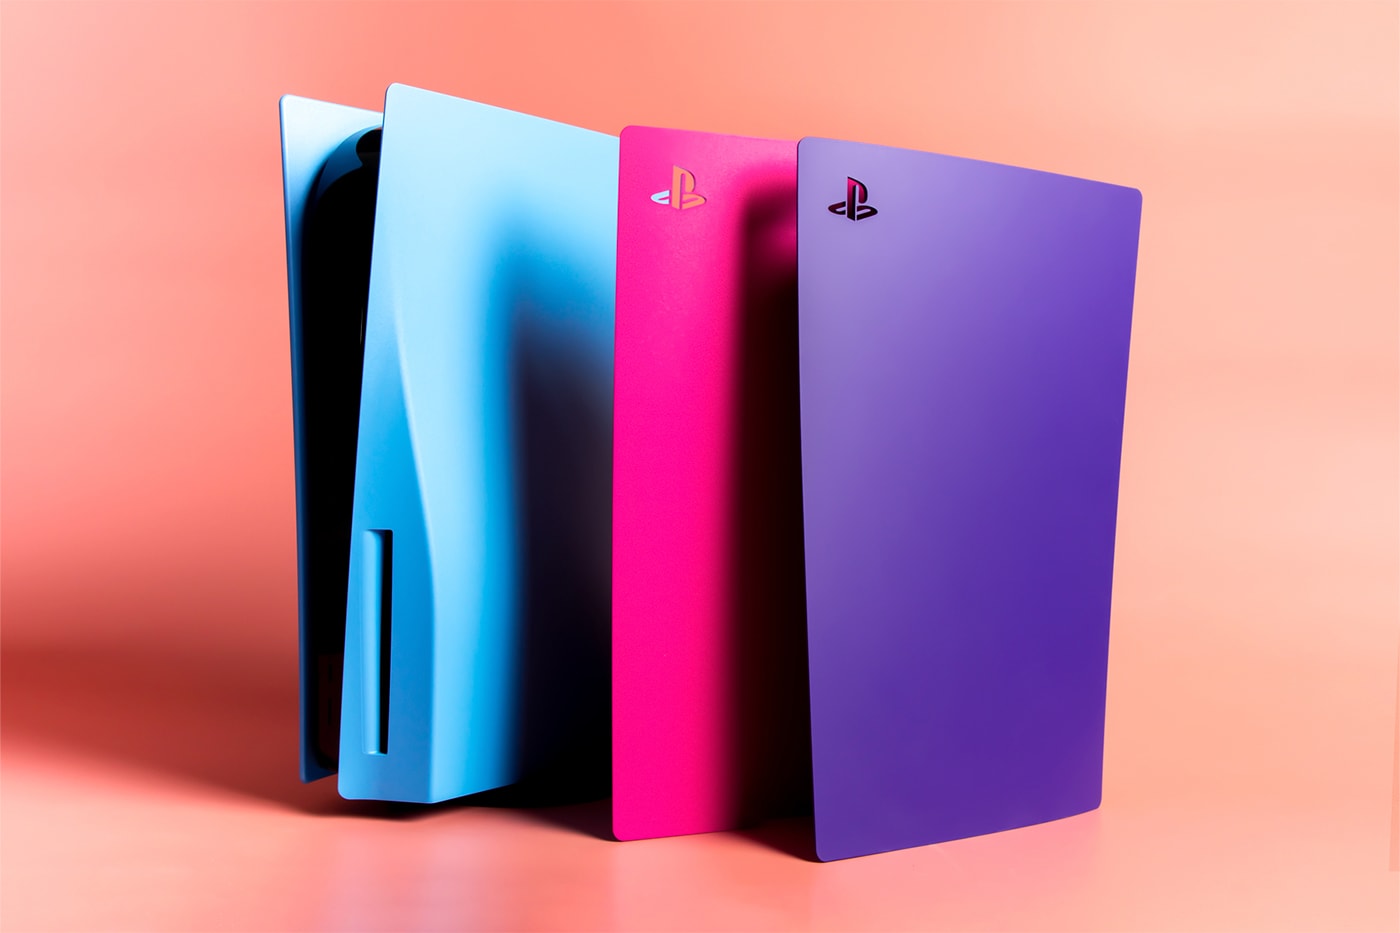 Sony PlayStation 5 Console Covers Closer Look Release Info Starlight Blue Nova Pink Galactic Purple Interactive Entertainment